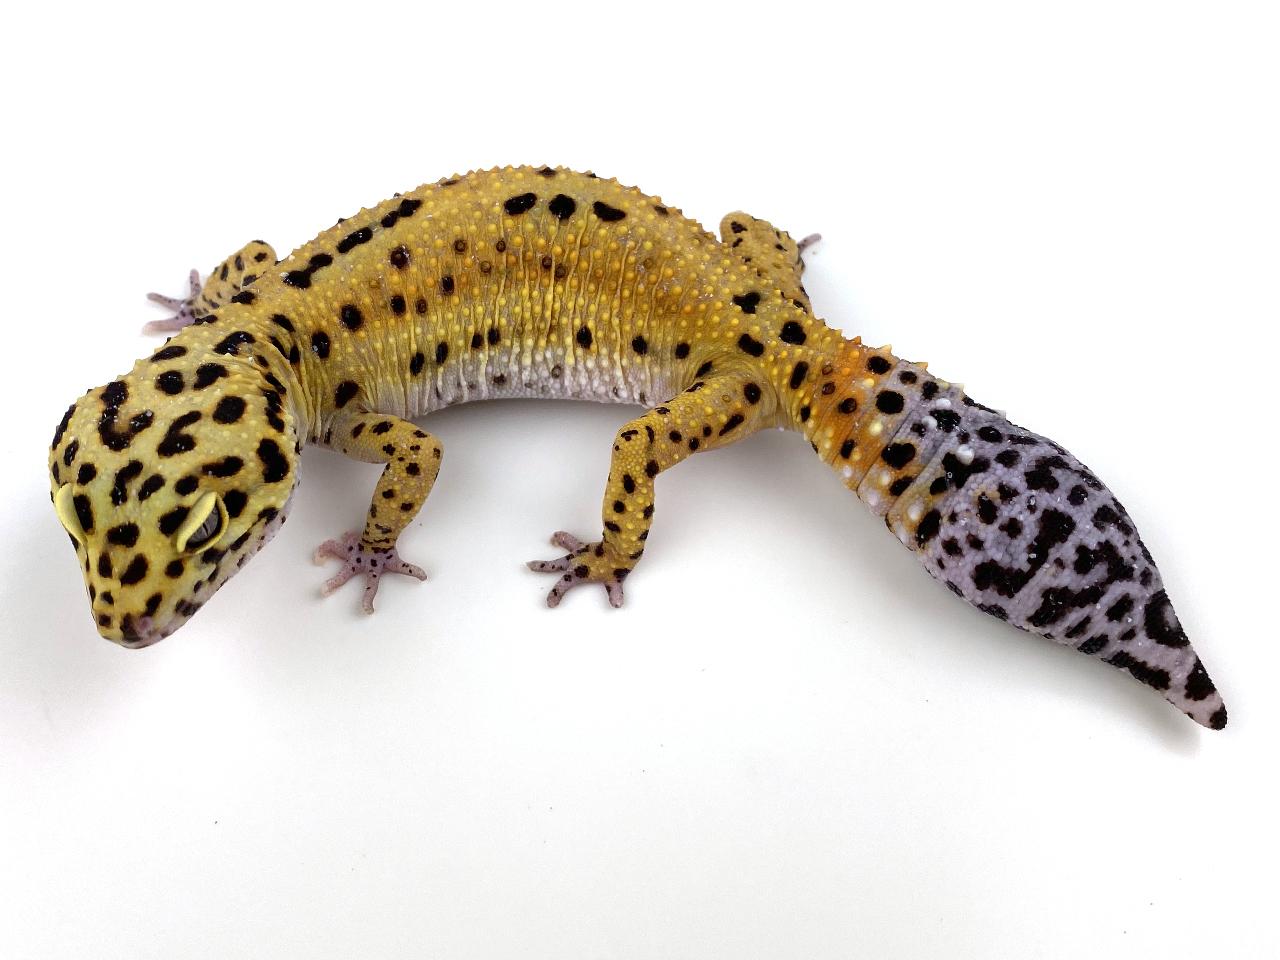 High Yellow Leopard Gecko by Royal Constrictor Designs